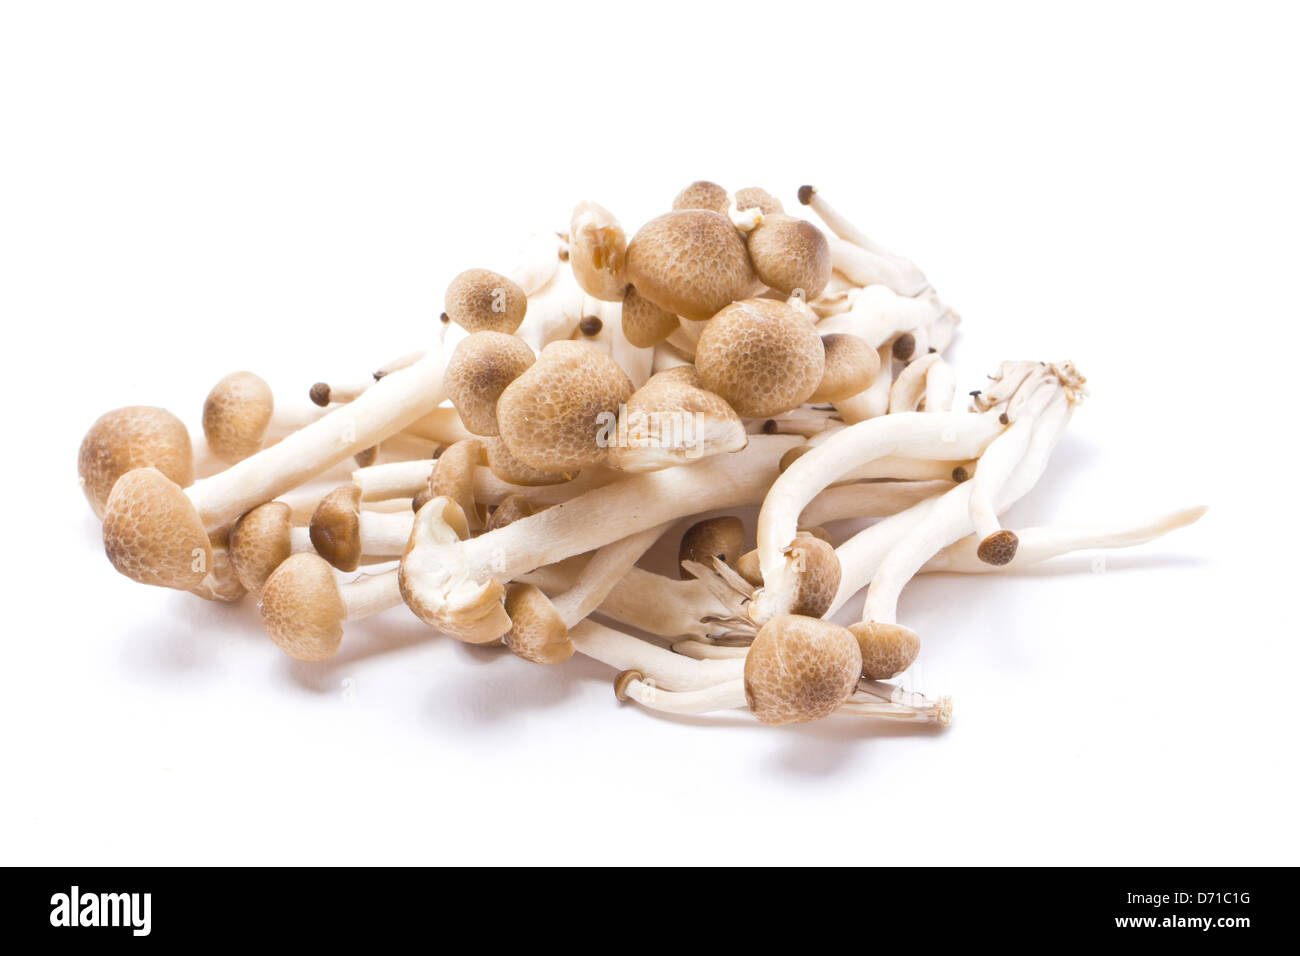 Brown Beech Mushrooms Isolated on White. Stock Photo